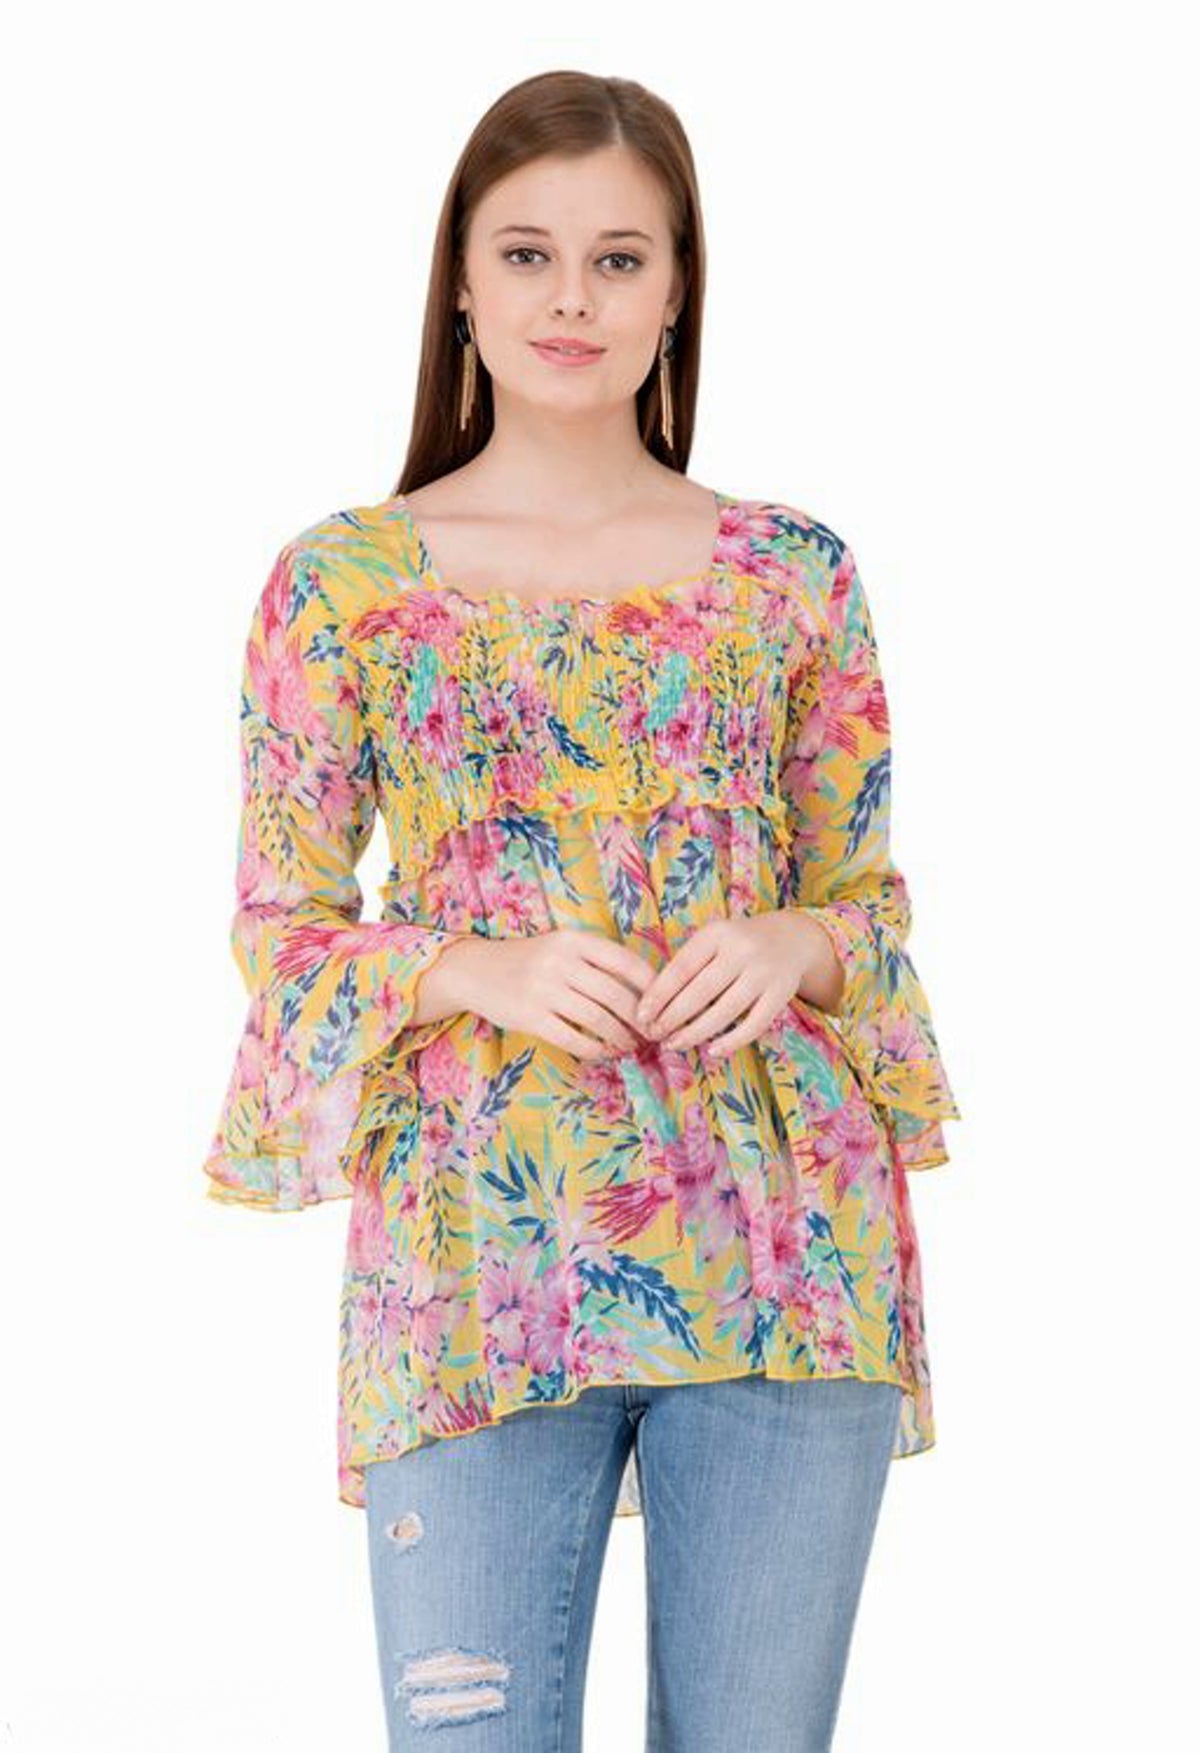 Stylish Tops Online- Buy Latest Cotton Tops for Girls/Women